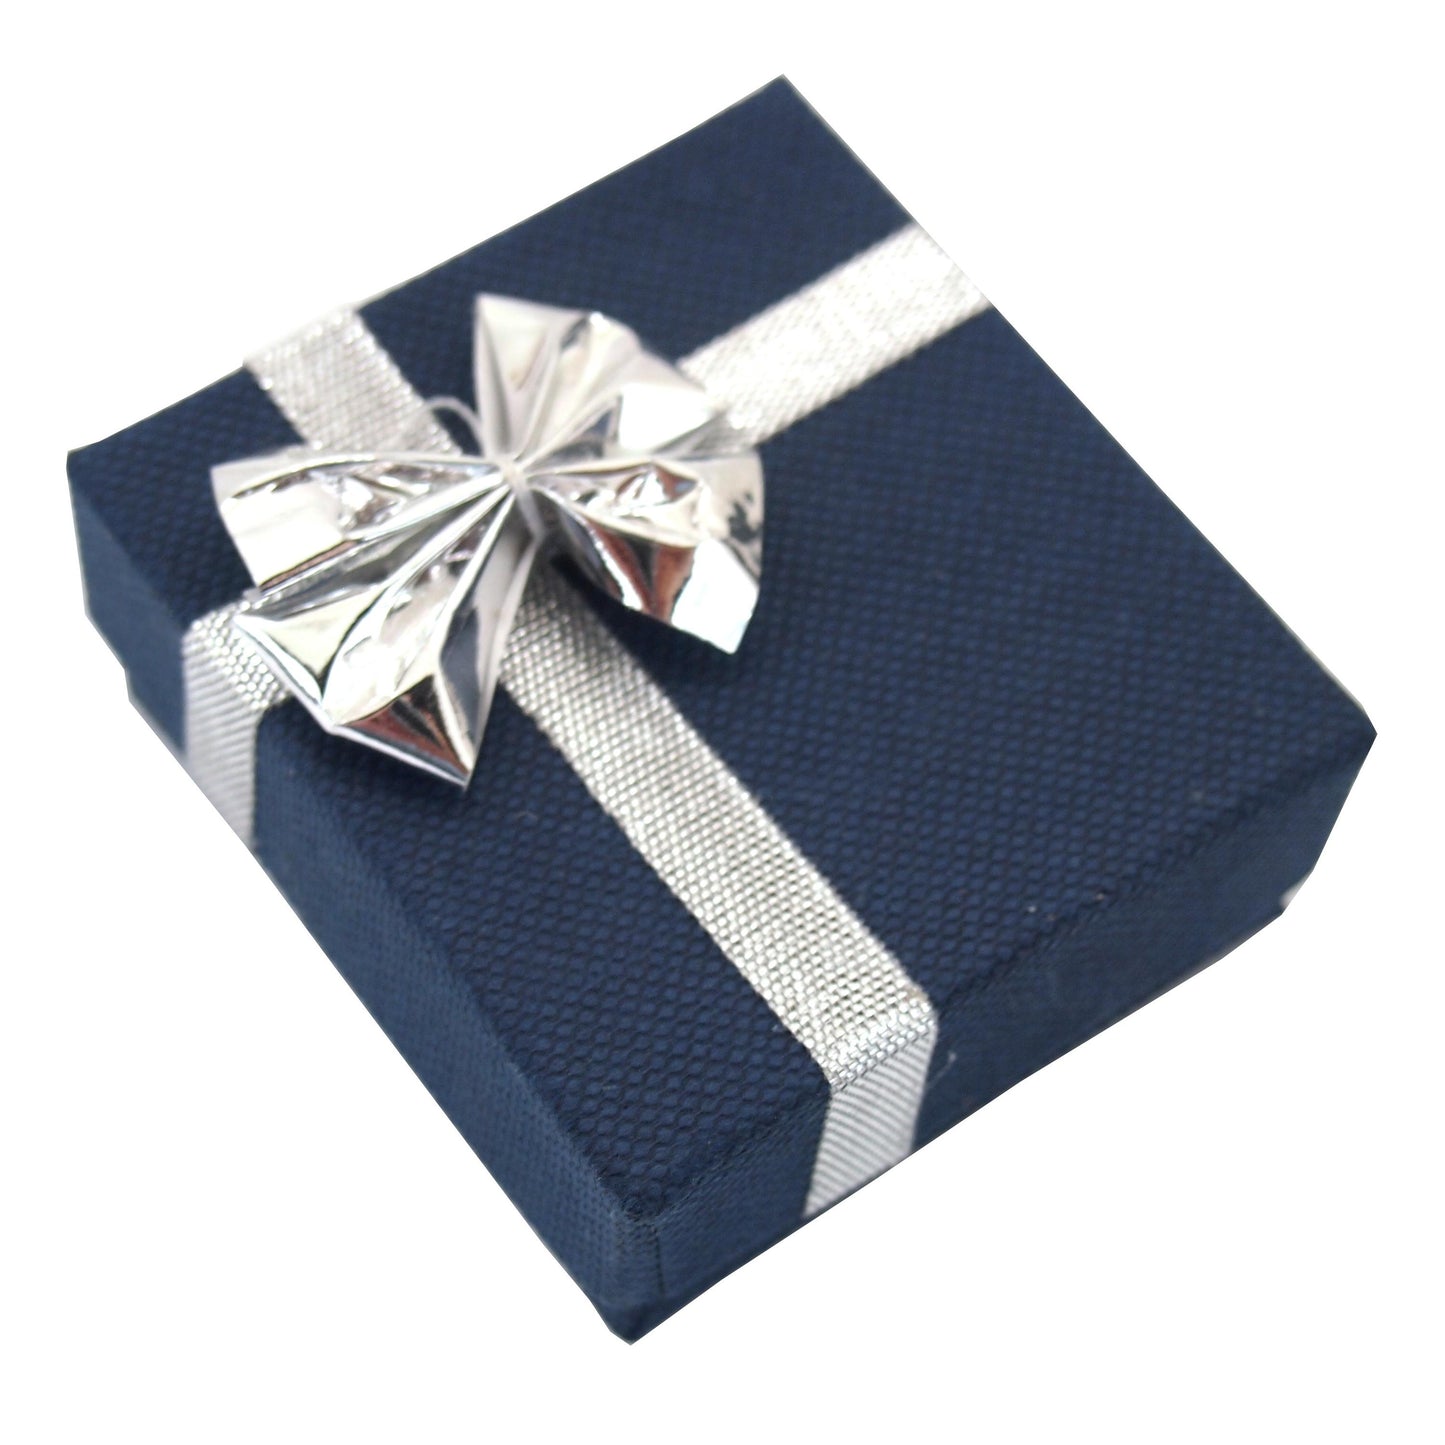 Earring Bow-Tie Gift Box Blue 2" (Only 1 Box)